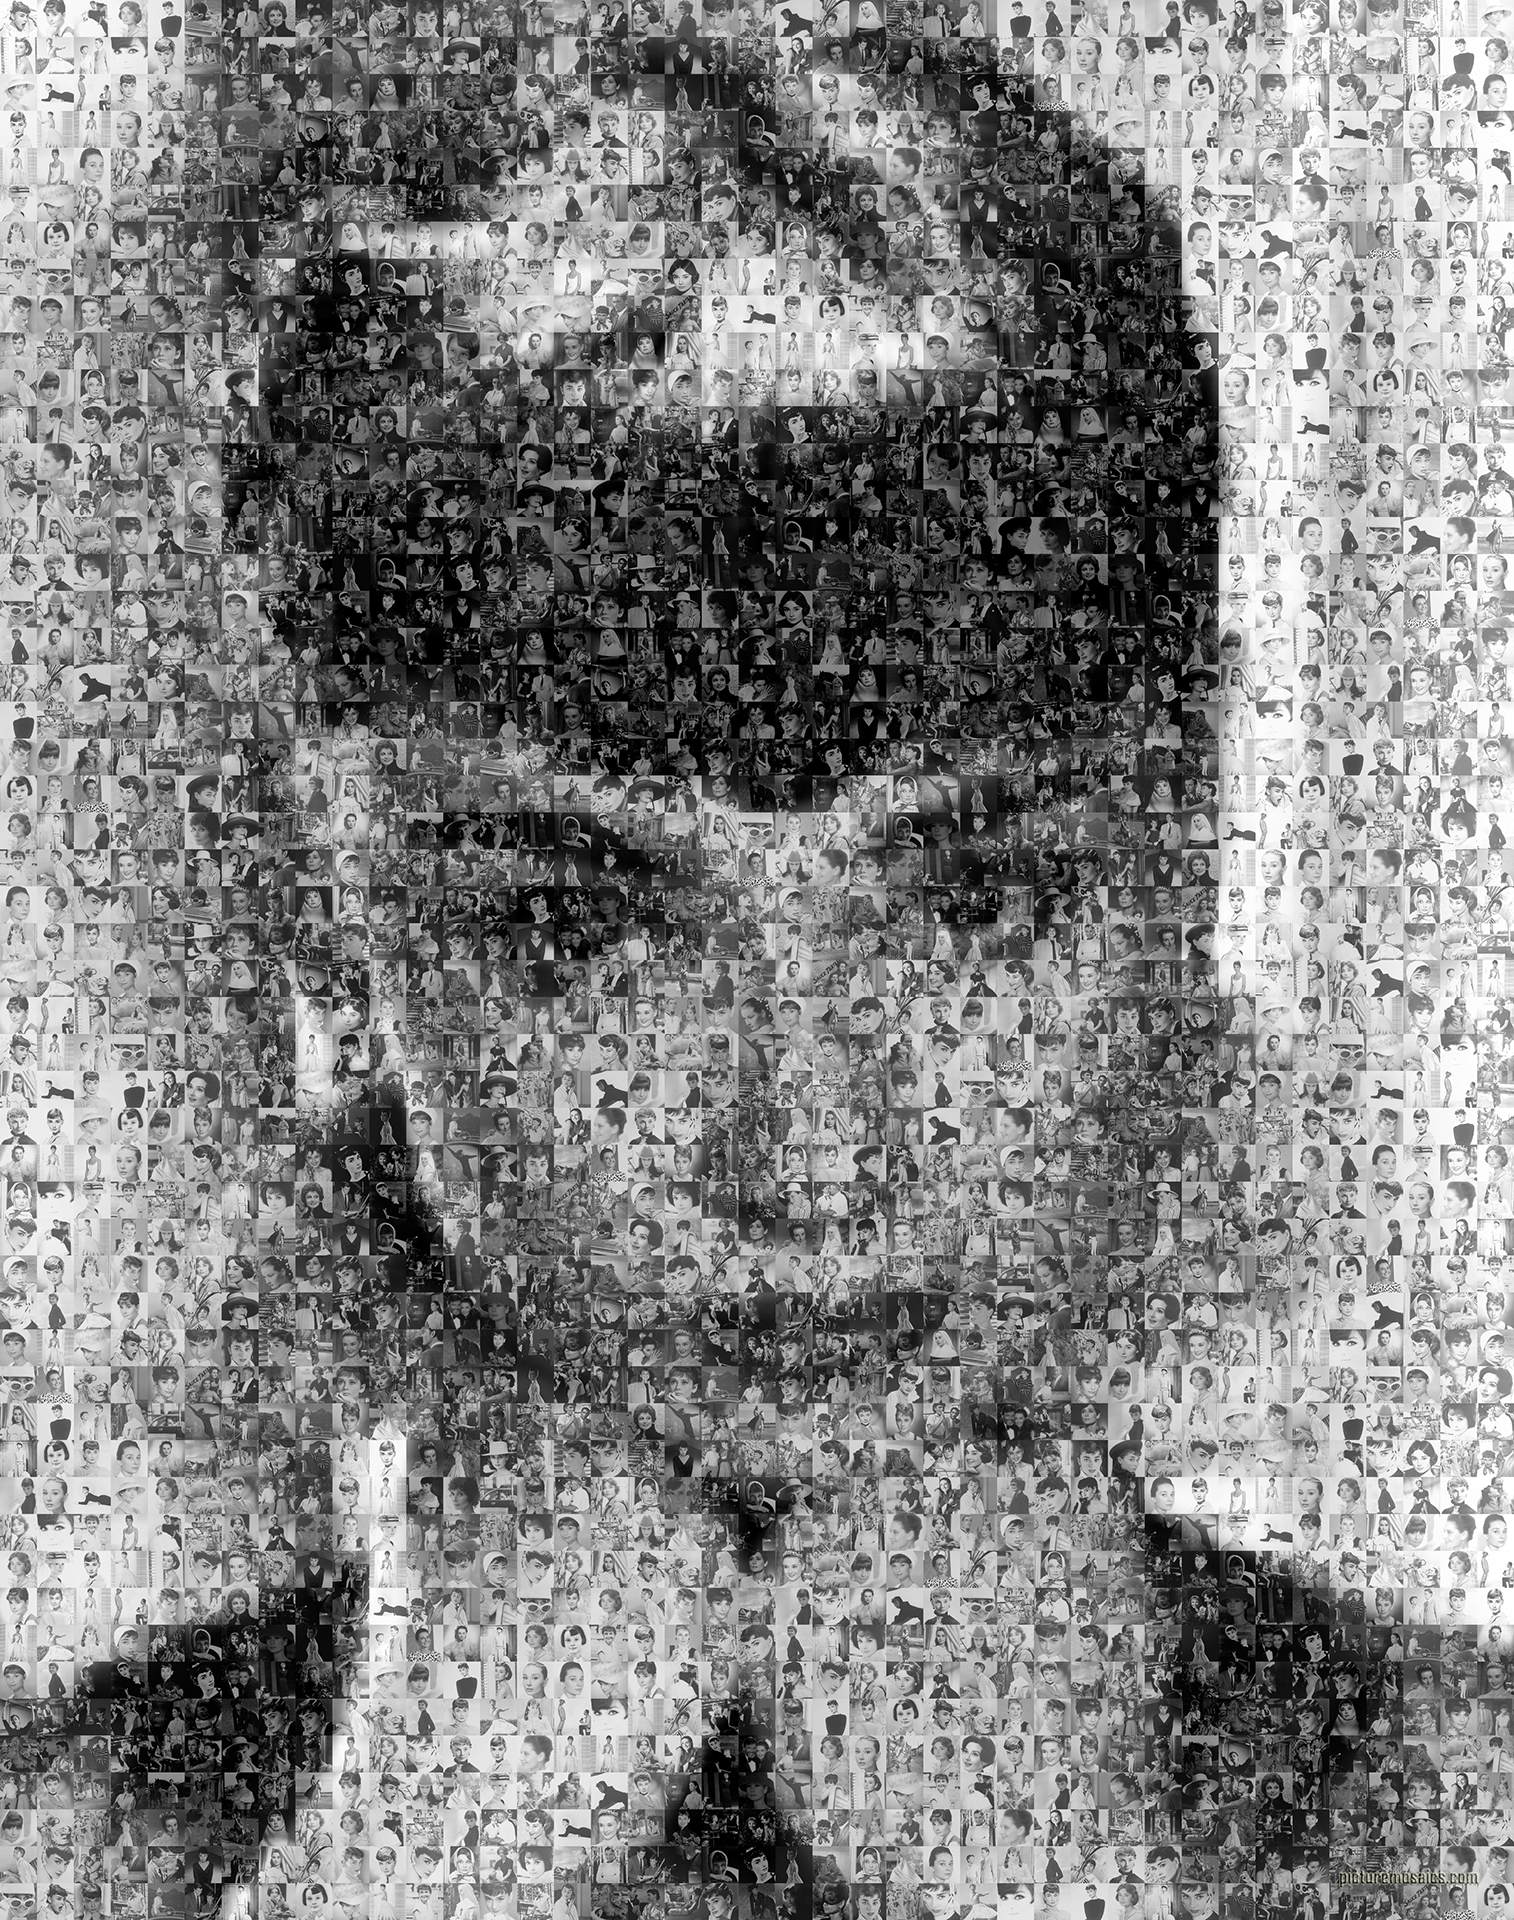 photo mosaic created using 186 images from Audrey's films and photos